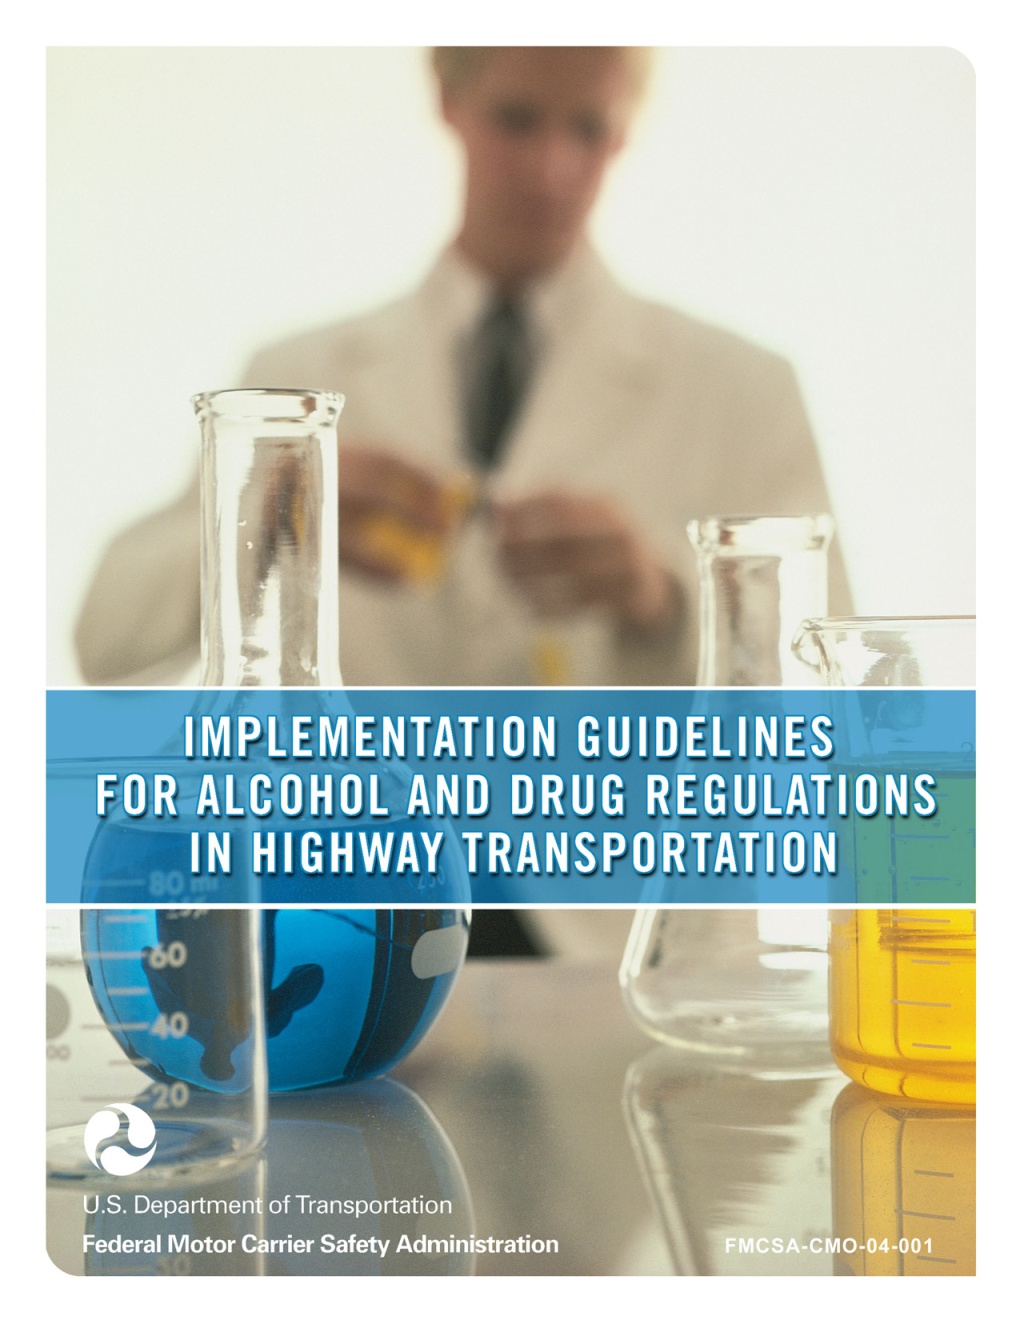 Implemetation Guidelines for Alcohol and Drug Regulations in Highway